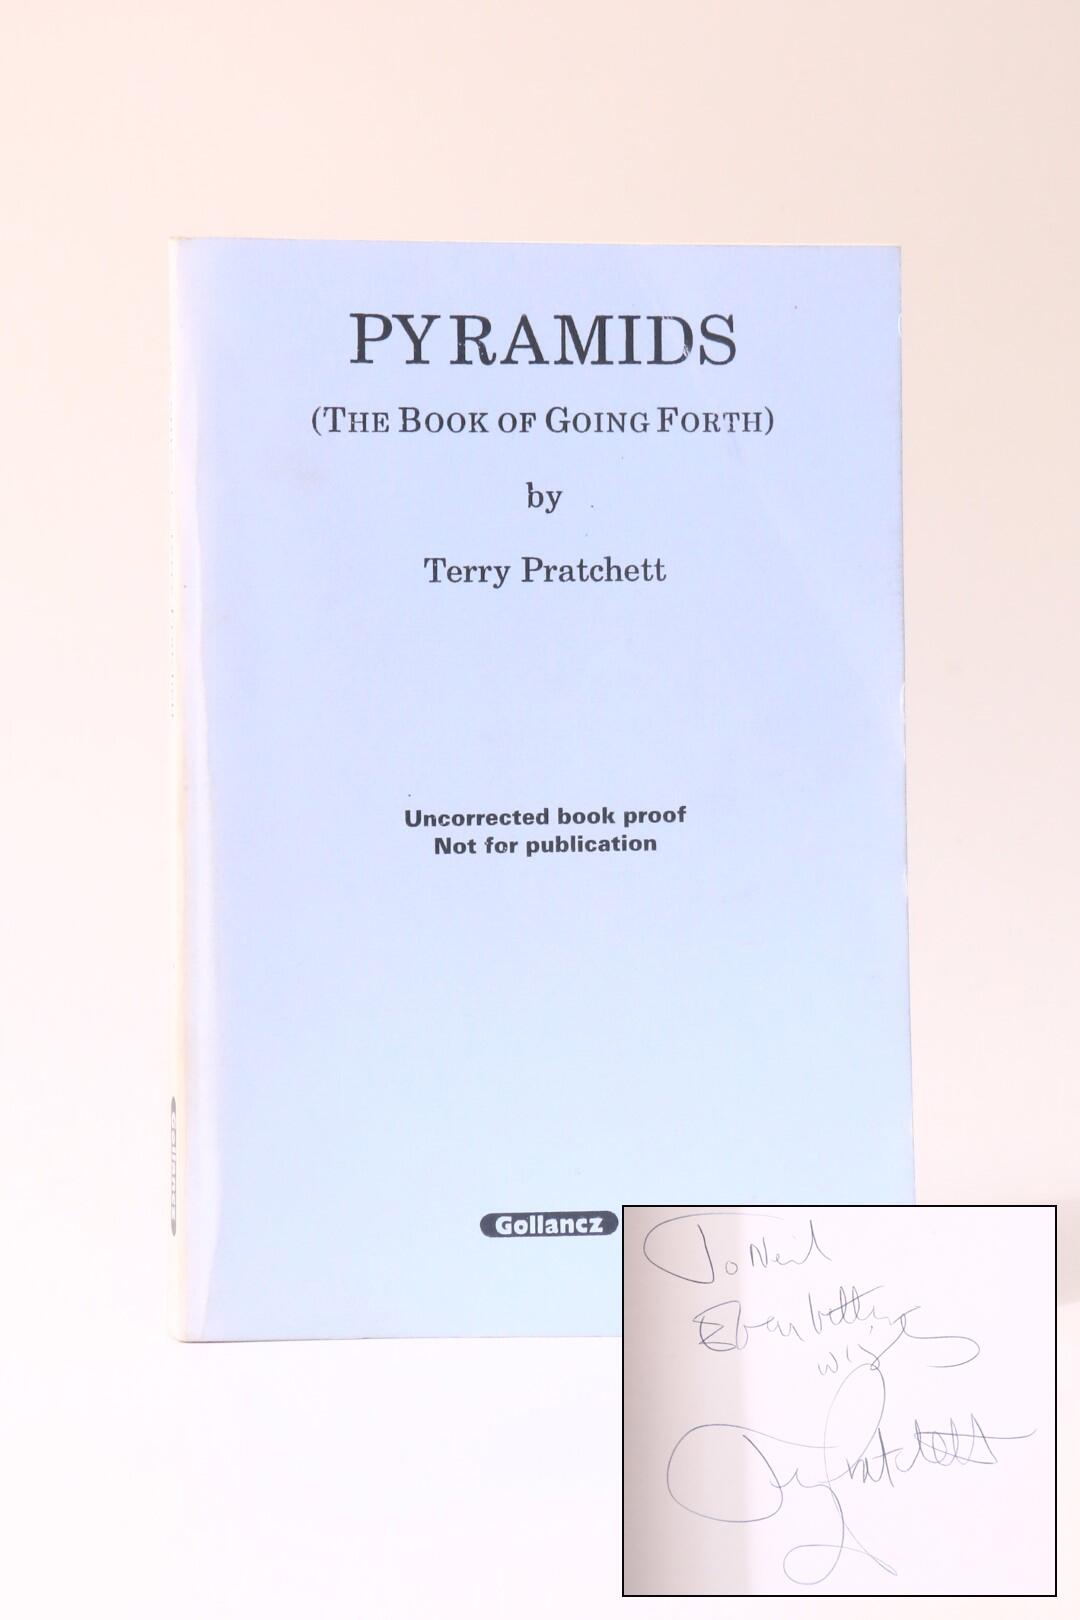 Terry Pratchett - Pyramids (the Book of Going Forth) - Gollancz, 1989, Proof. Signed